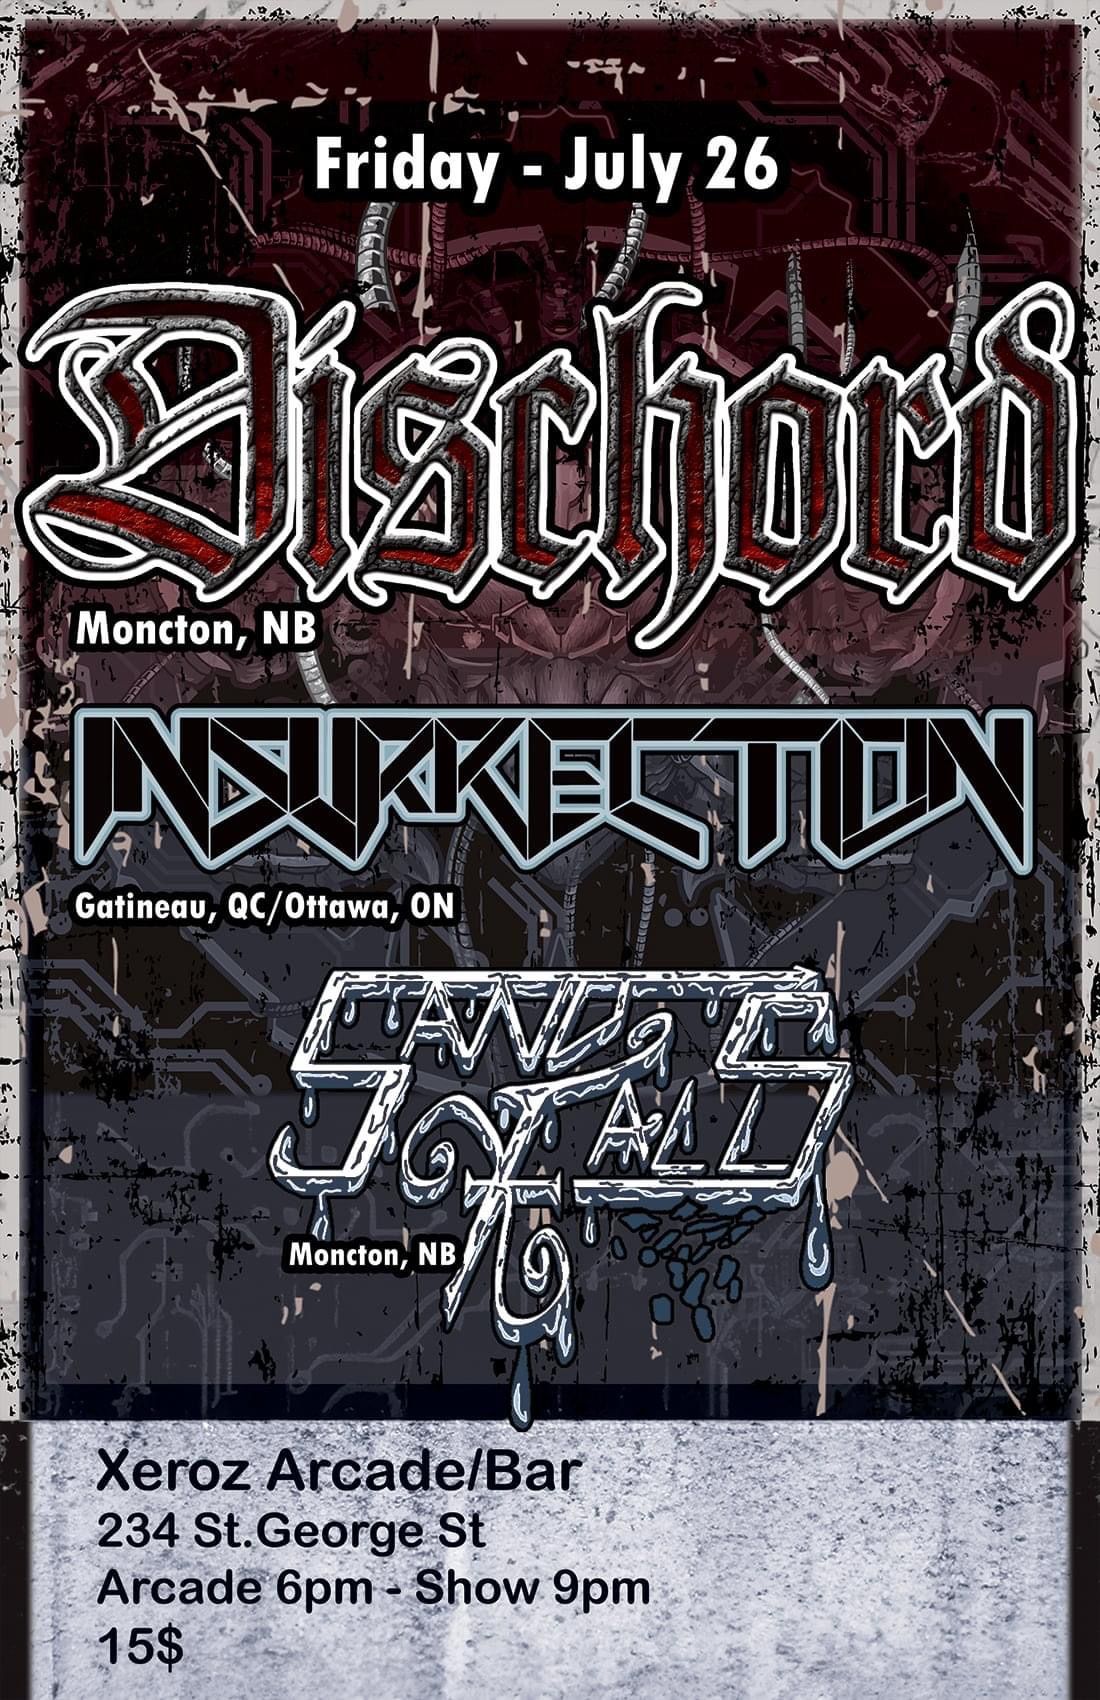 Dischord & Insurrection live in Moncton